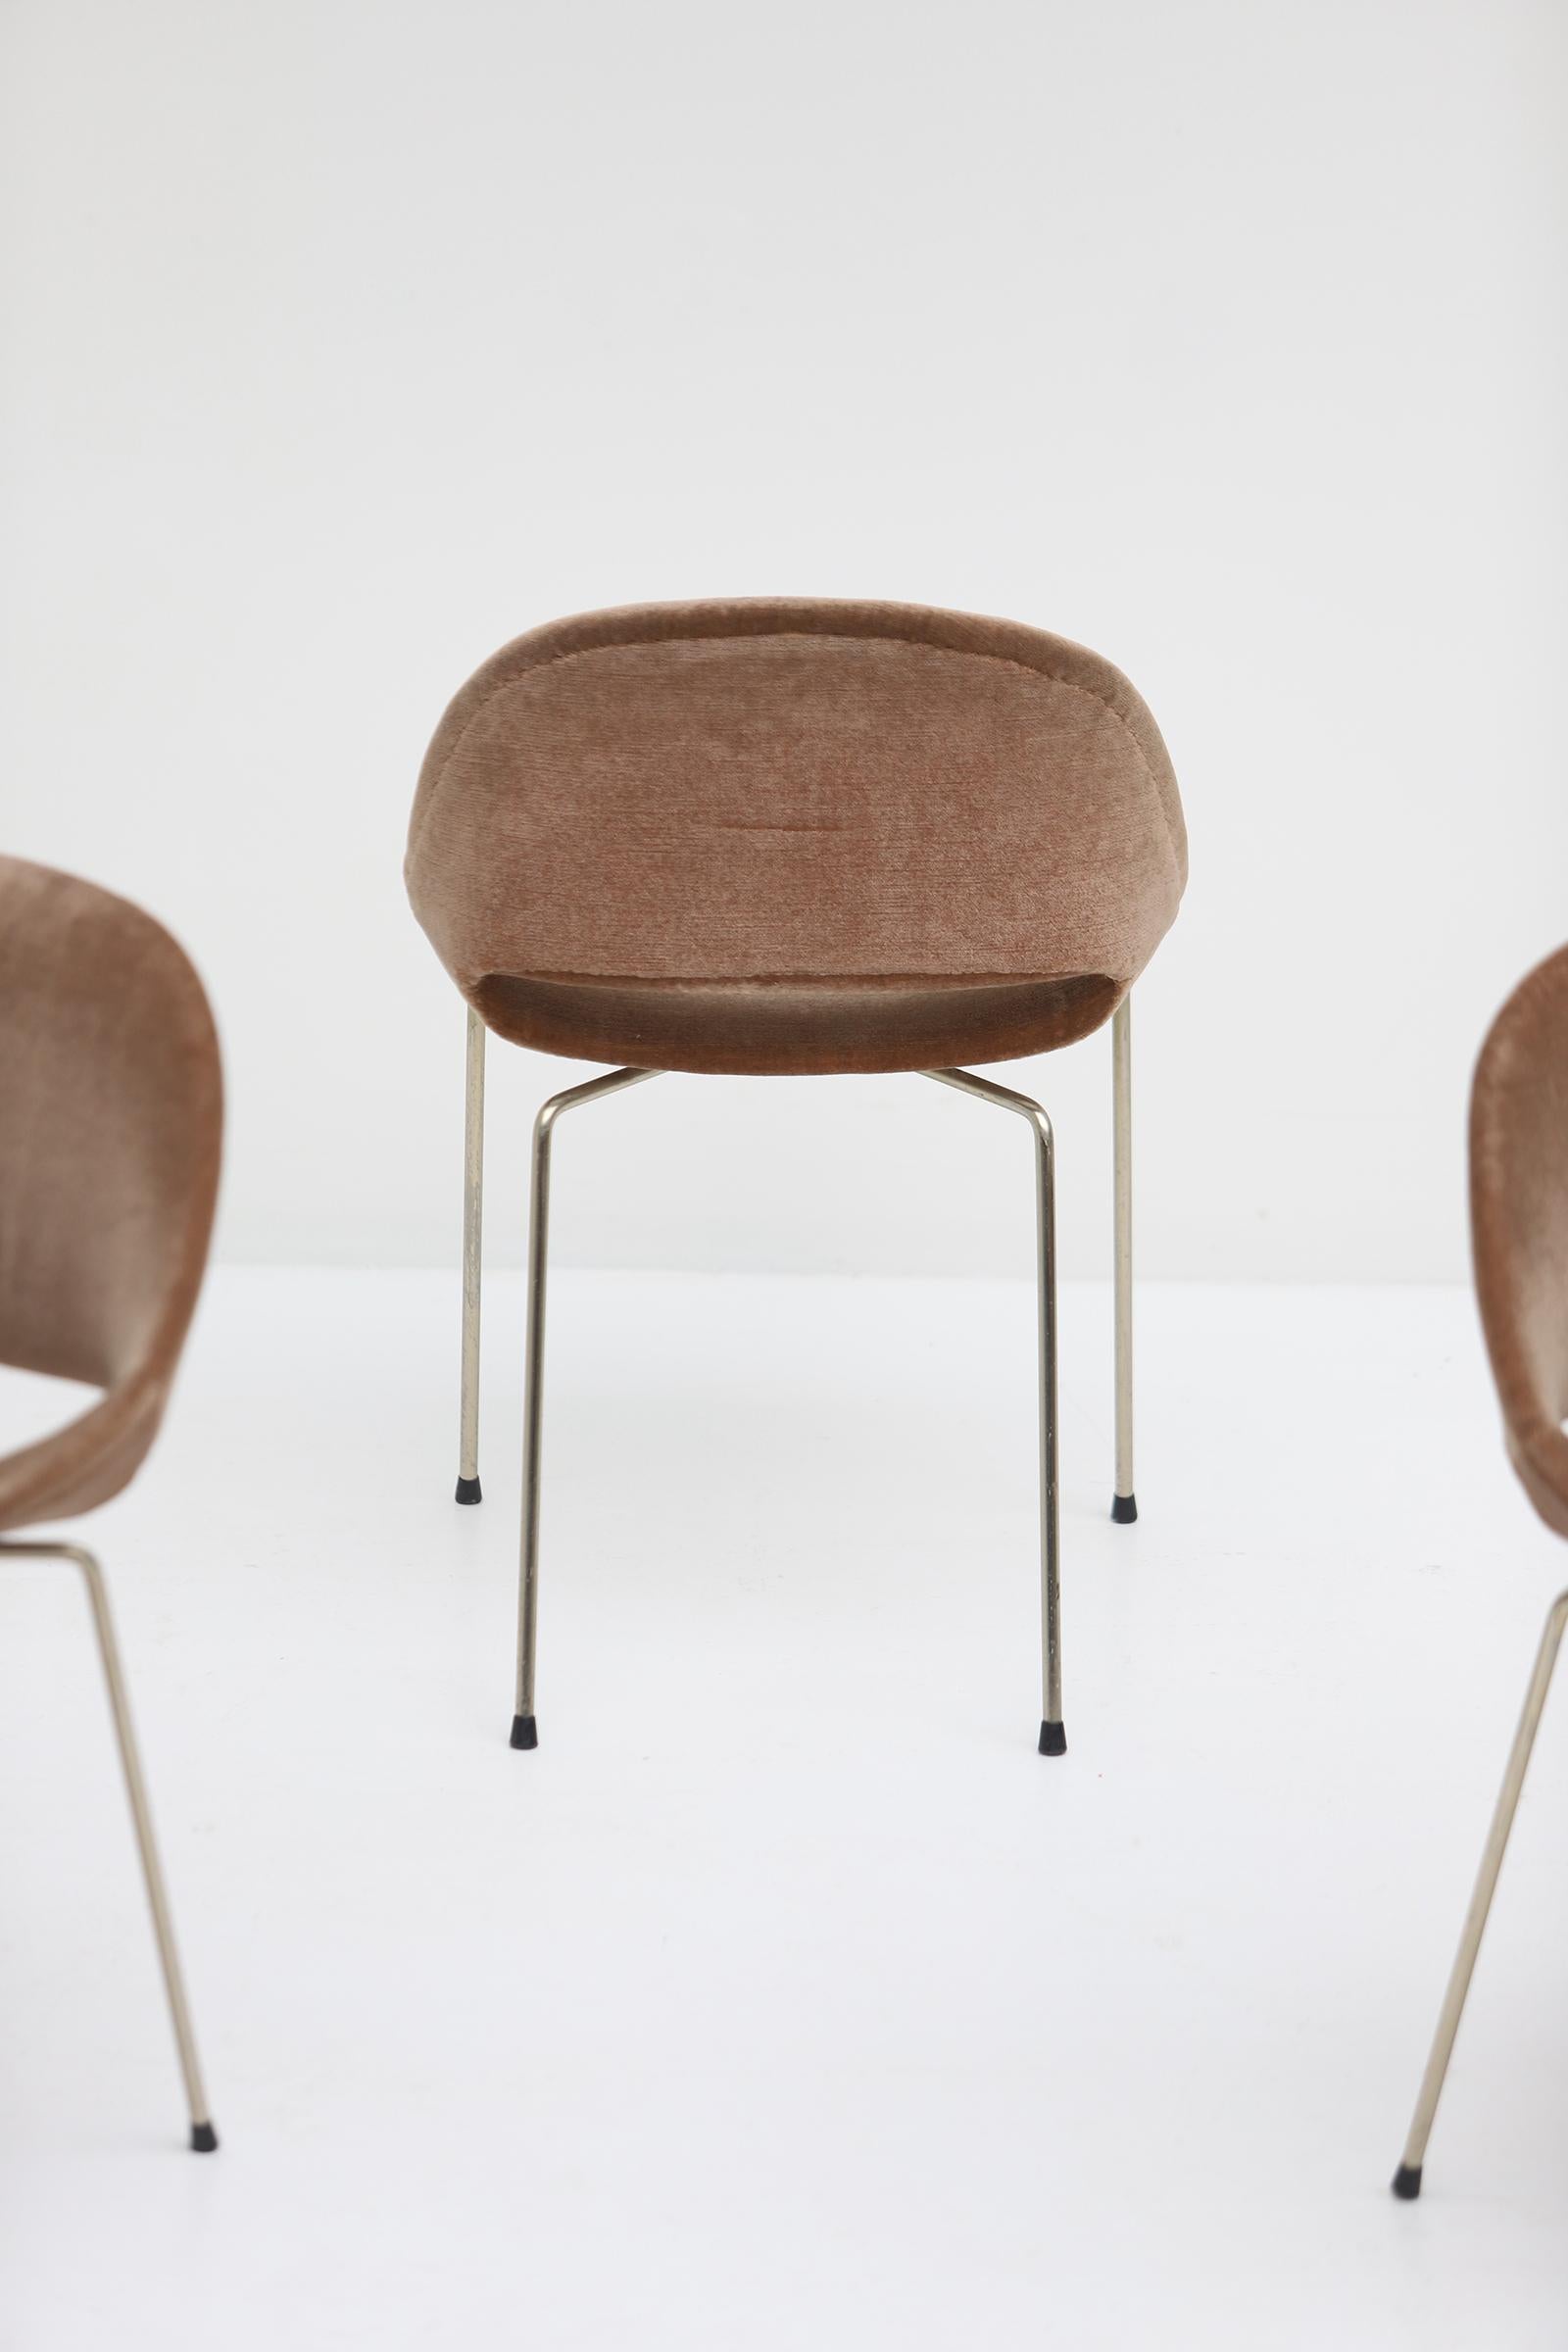 Set of 6 SL58 Dining Chairs by Léon Stynen, 1950s For Sale 2